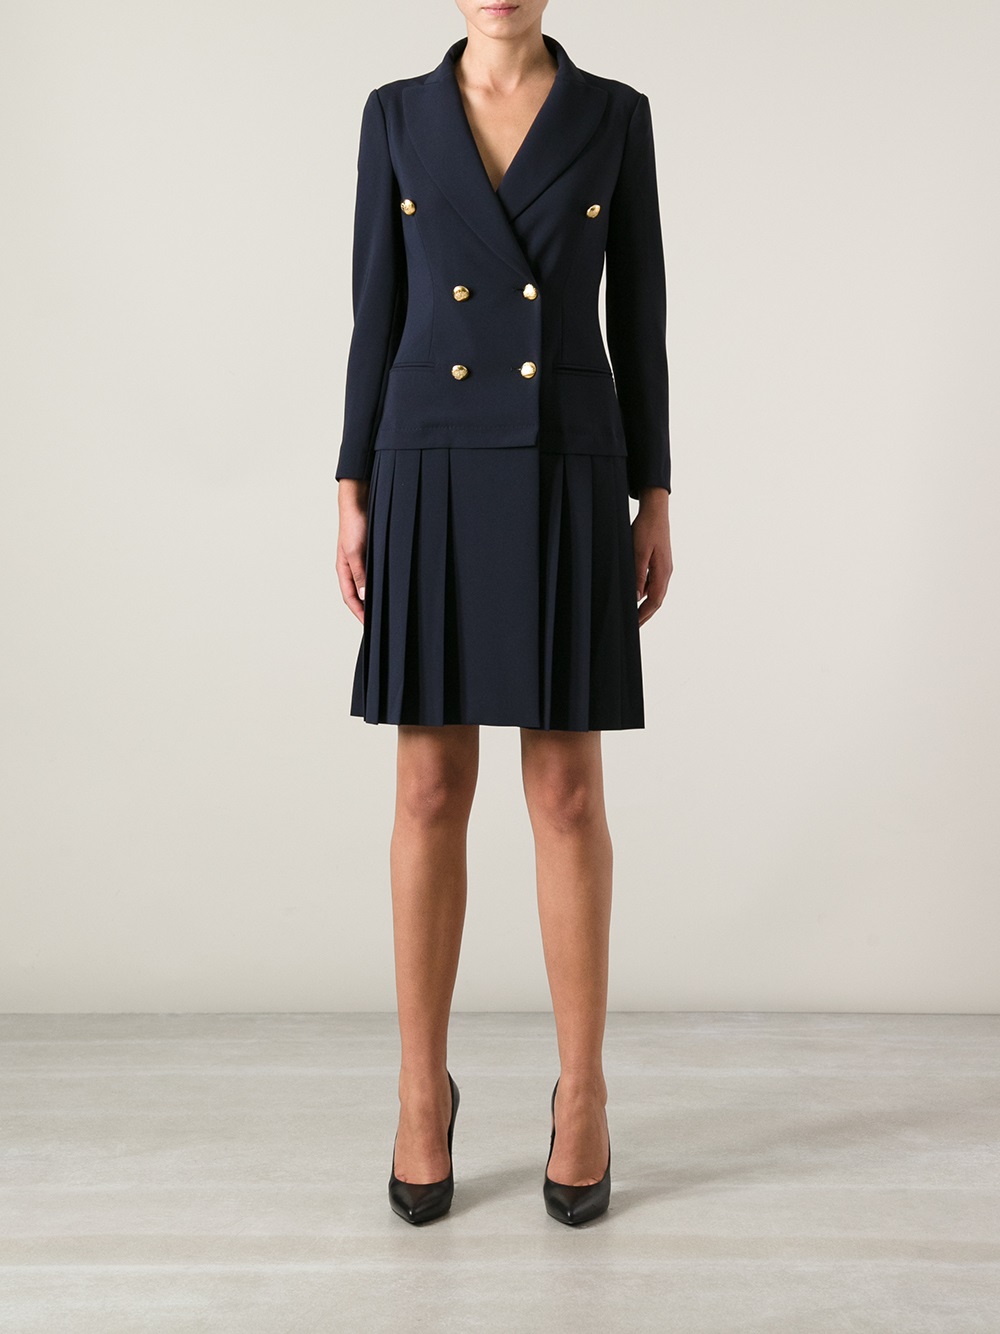 Moschino Double Breasted Coat Dress in Blue - Lyst